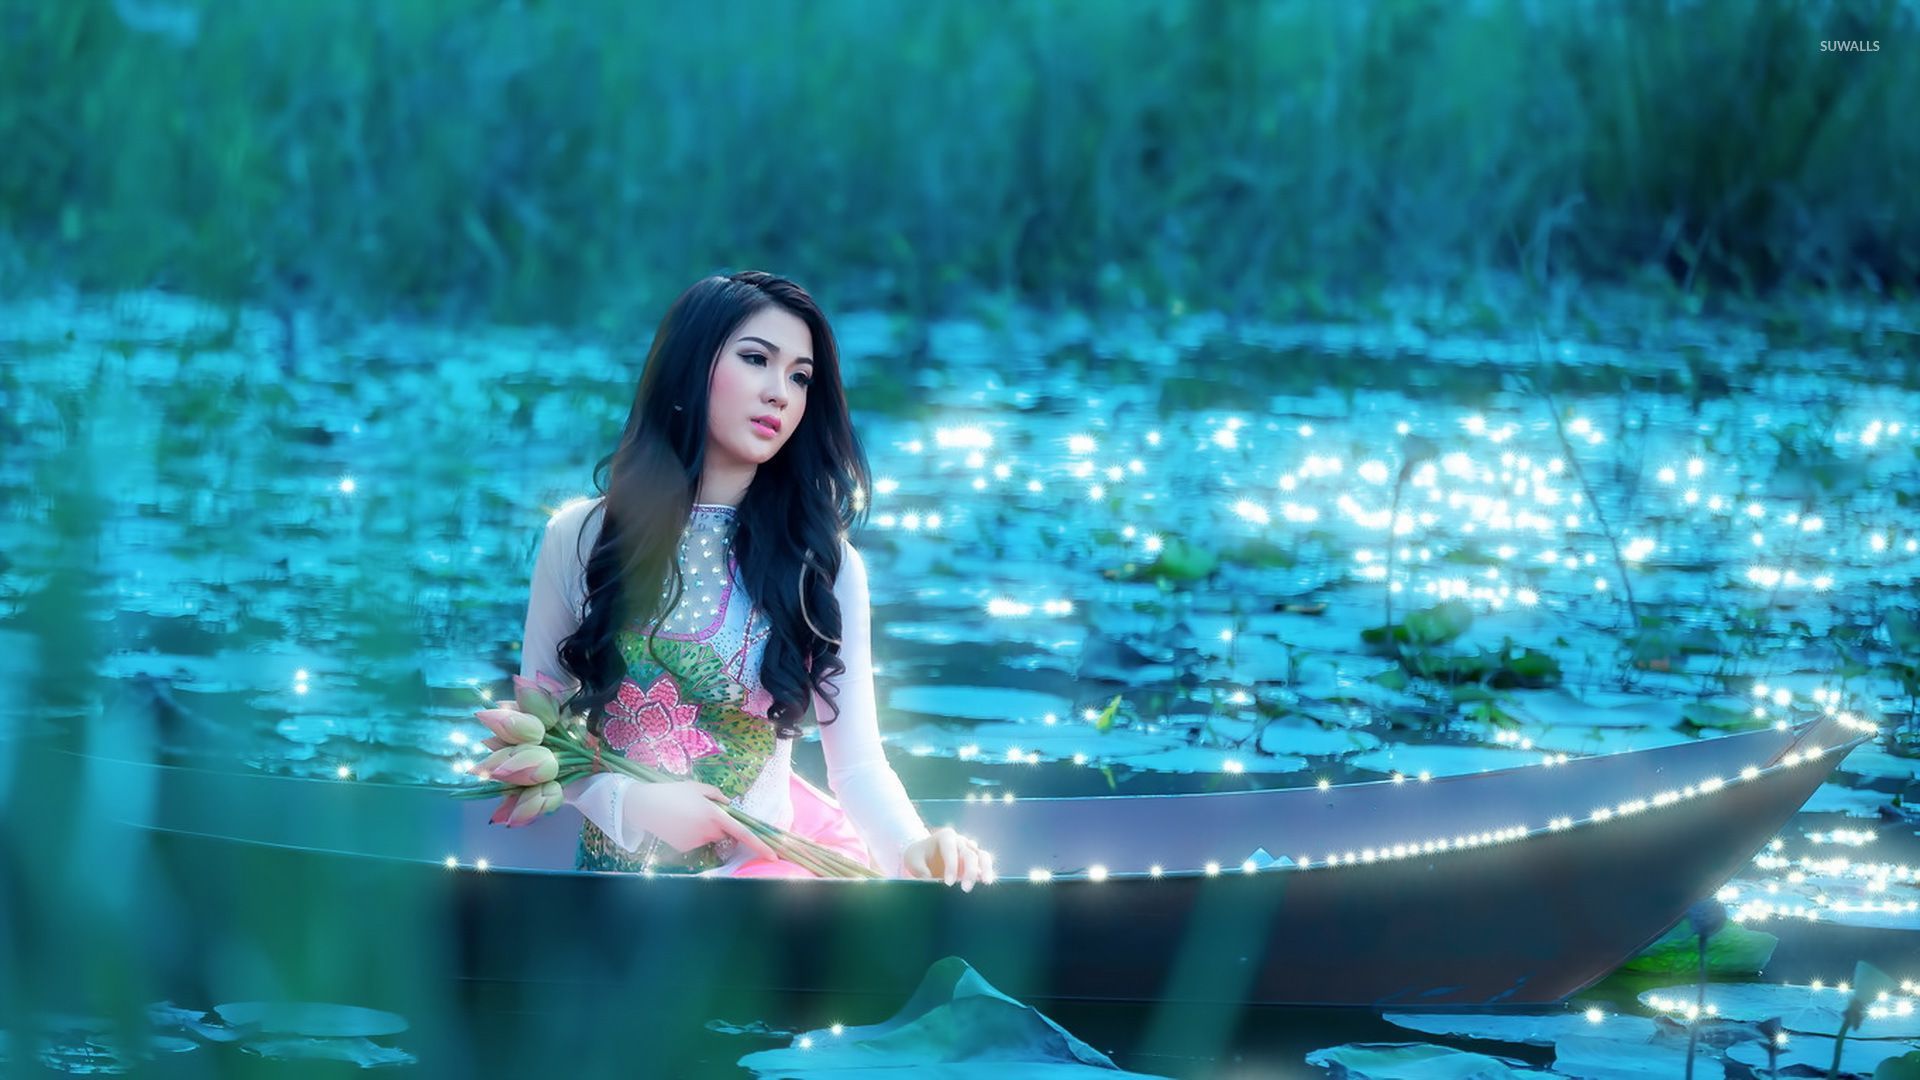 Girl with flowers sitting in the boat wallpaper - Girl wallpapers ...